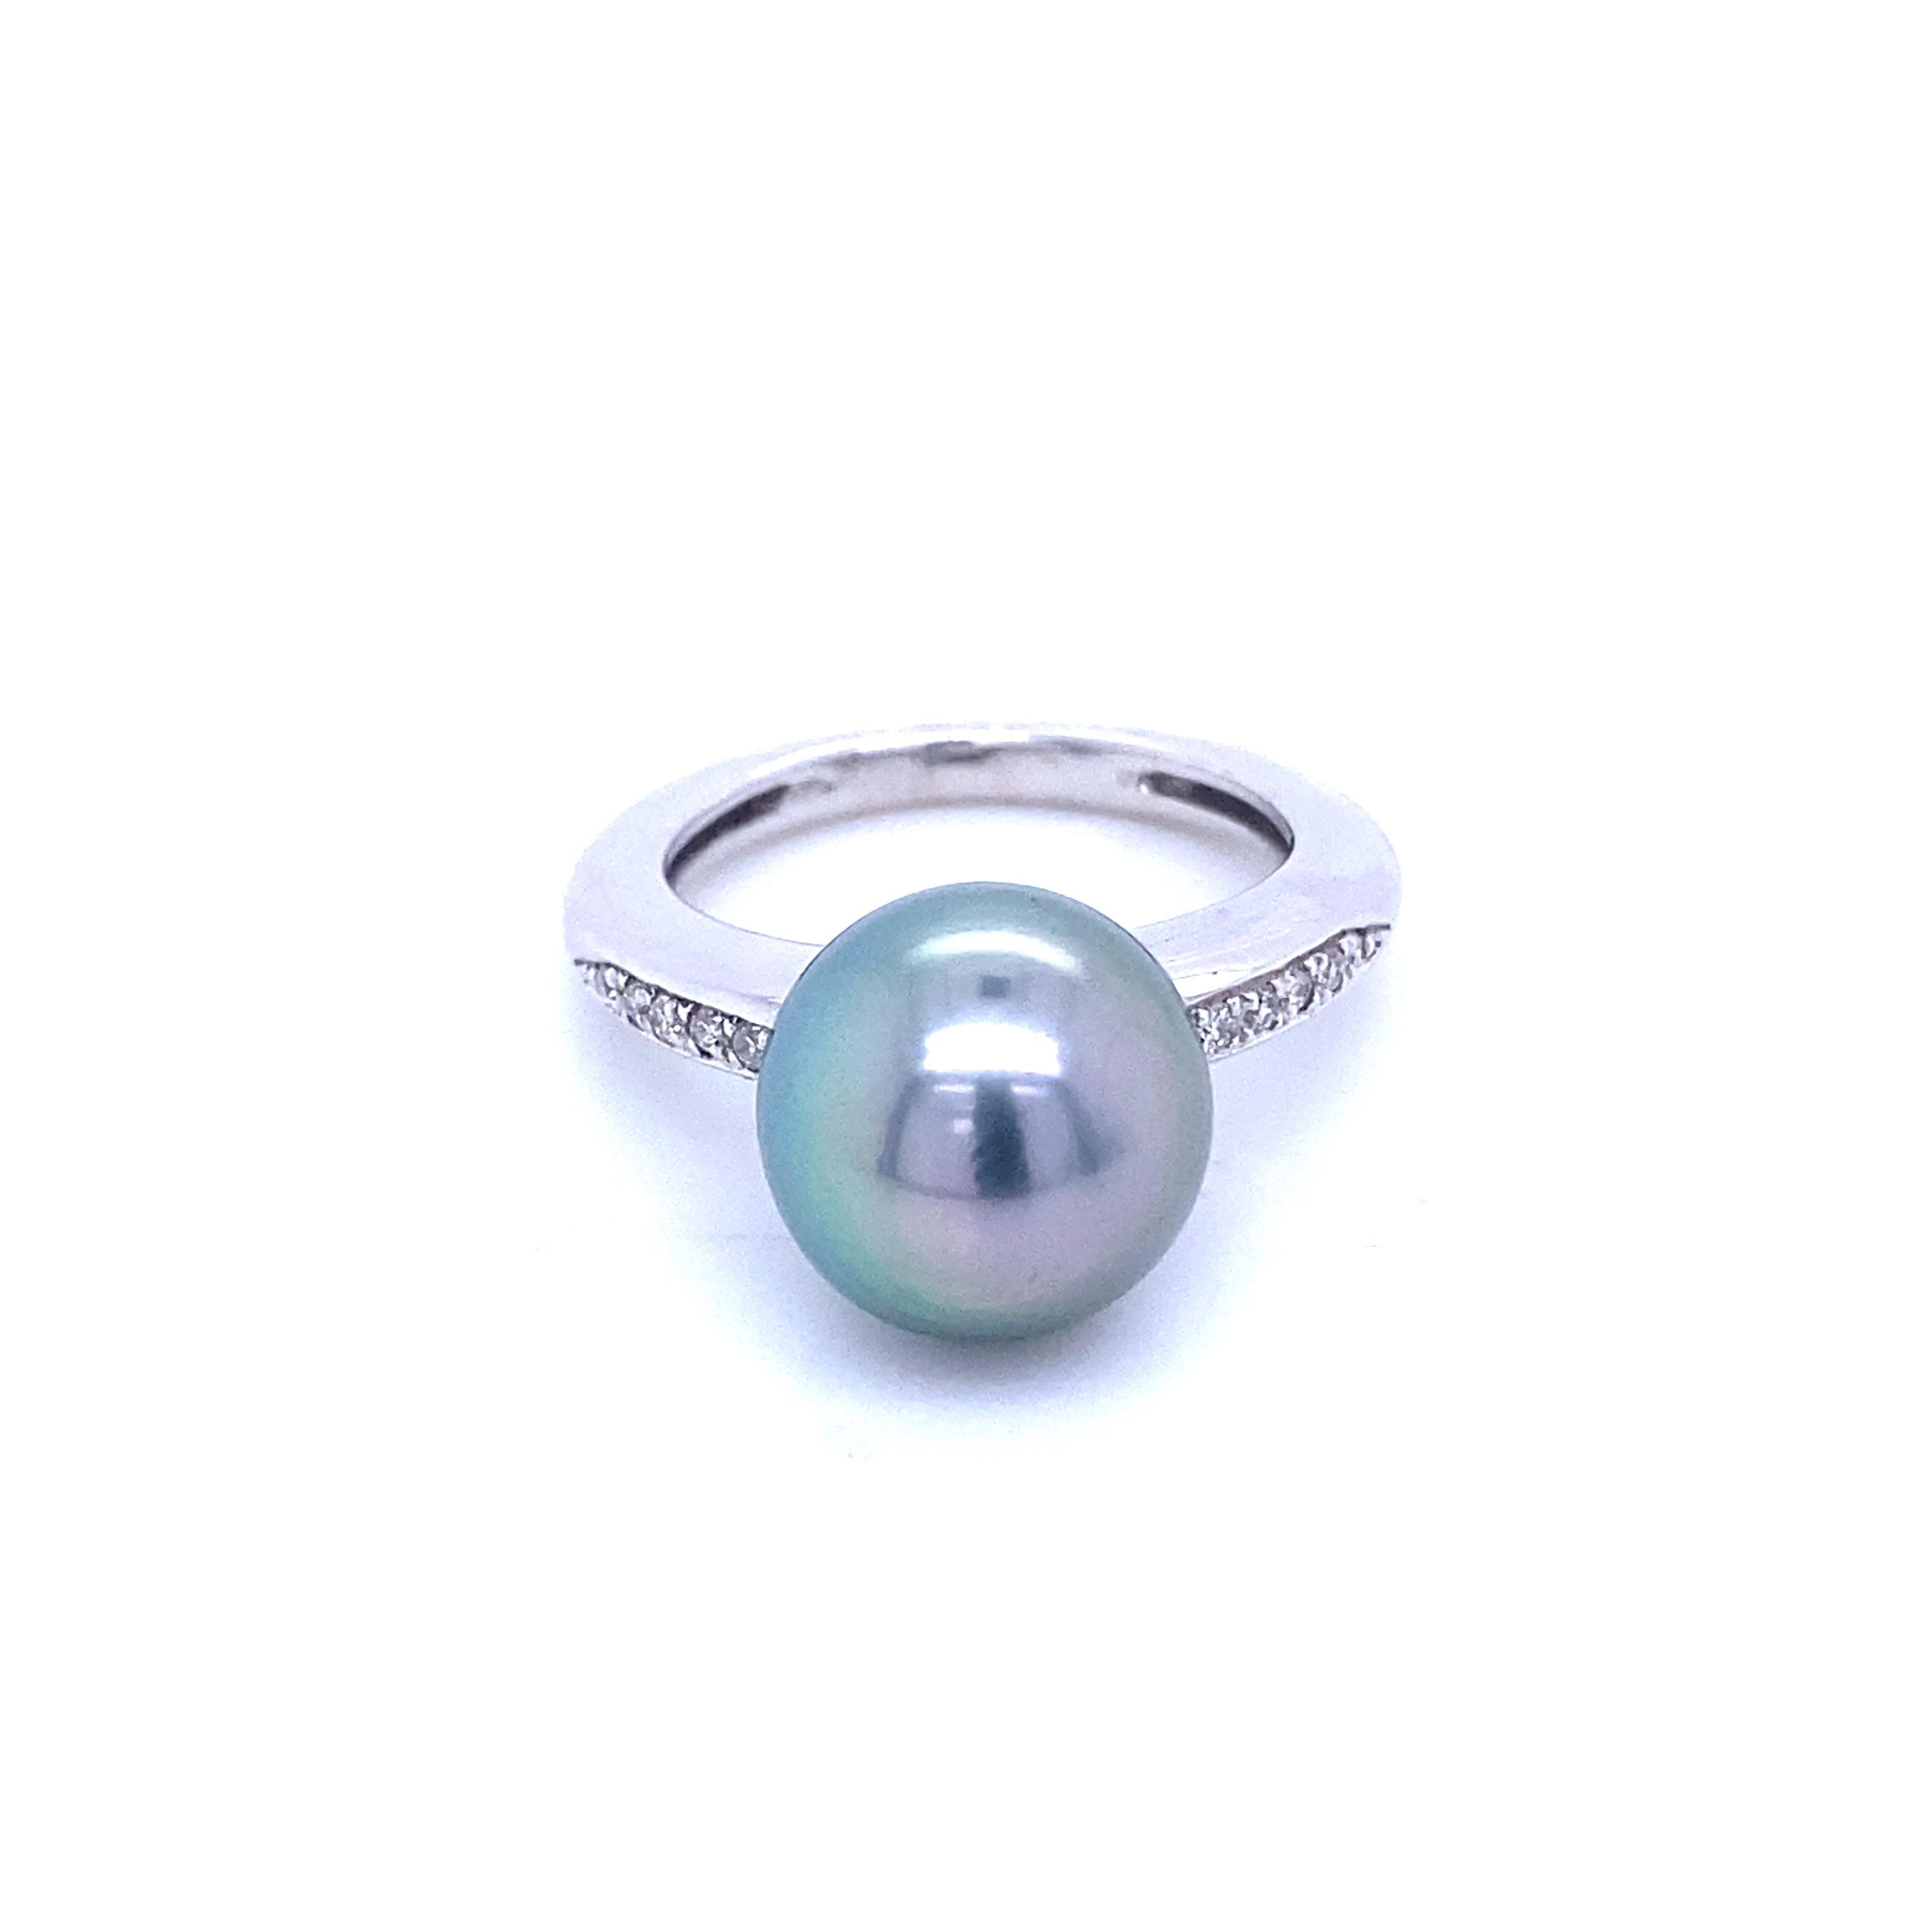 Discover this superb 18-carat white gold ring from the French collection Mesure et Art du Temps, adorned with a Tahitian pearl and diamonds. This ring is a true masterpiece of beauty and elegance, symbolizing perfection and love.

The white gold